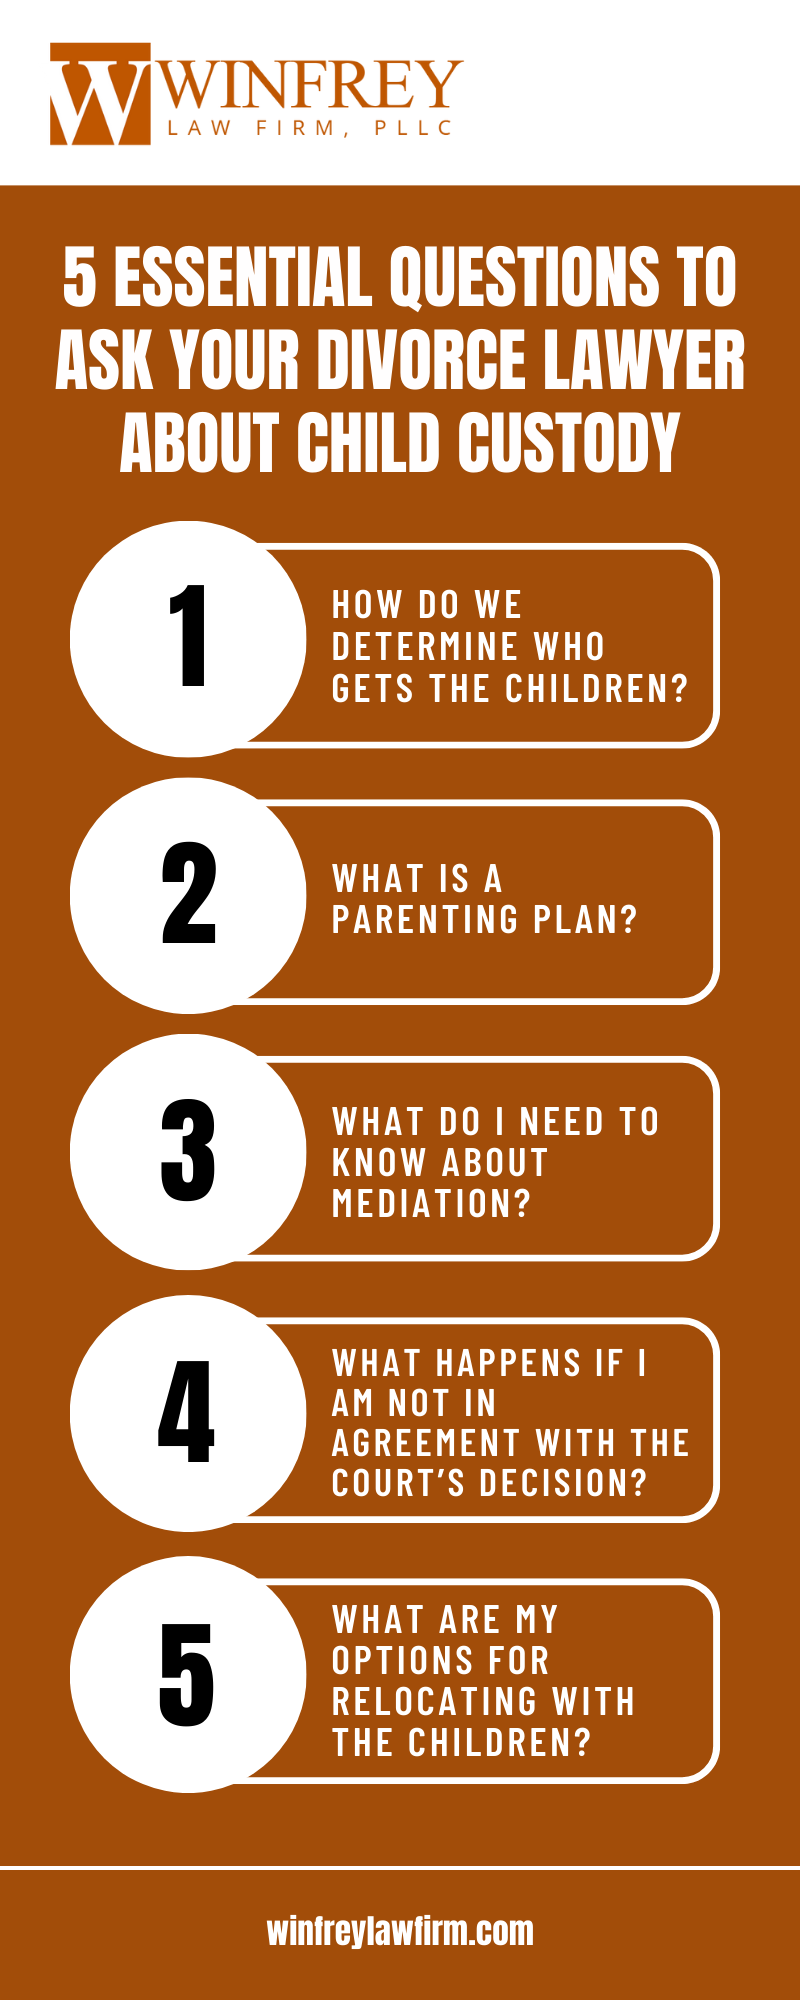 5 Essential Questions To Ask Your Divorce Lawyer About Child Custody Infographic